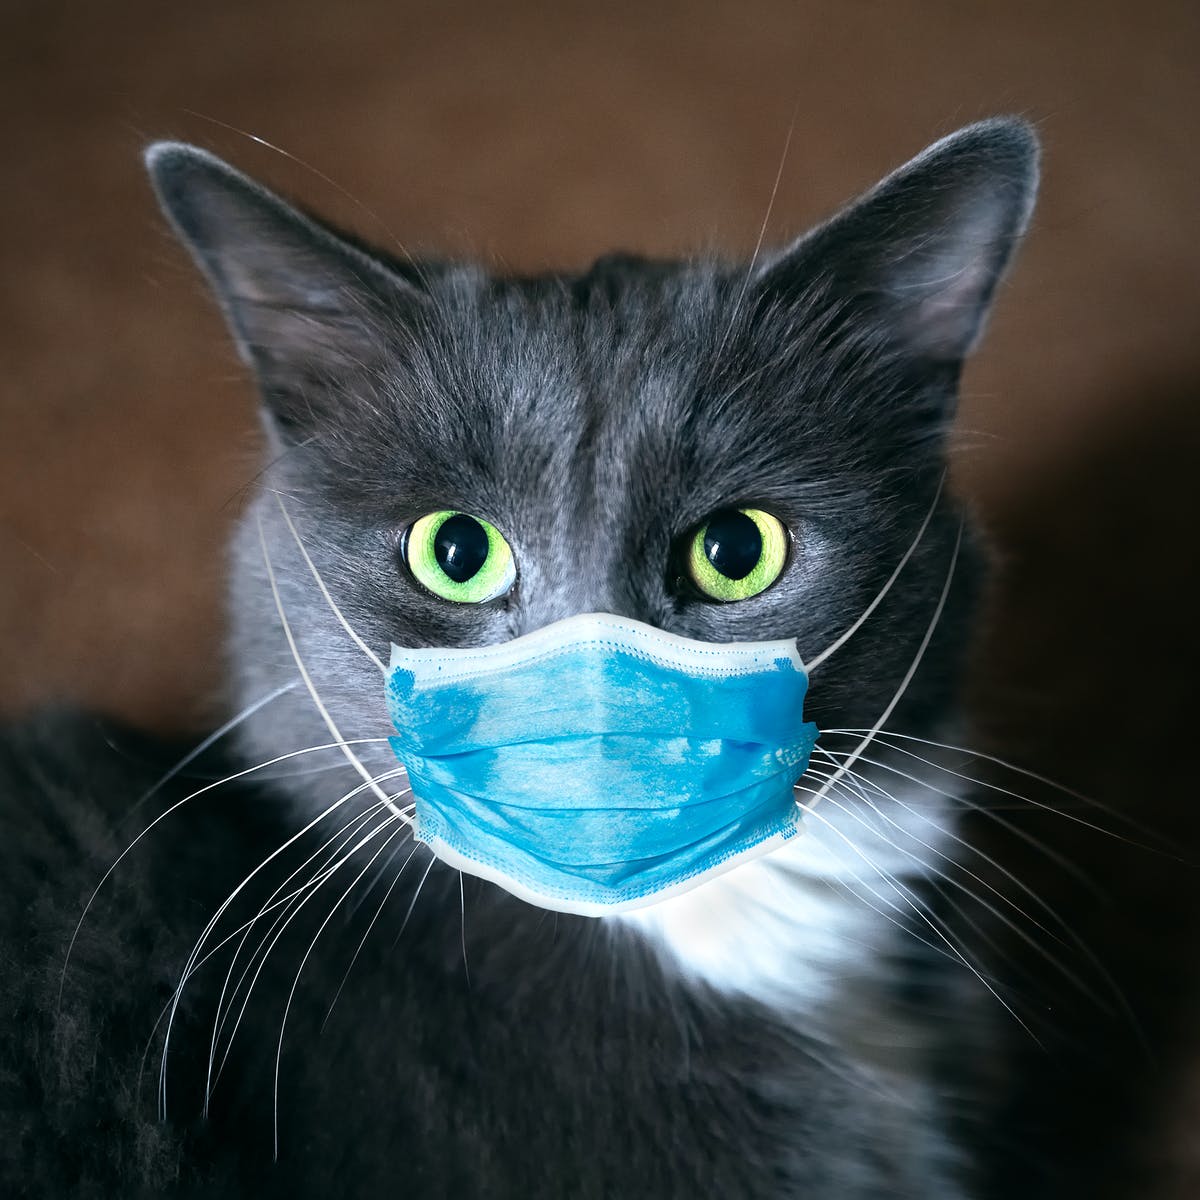 Cat with a mask